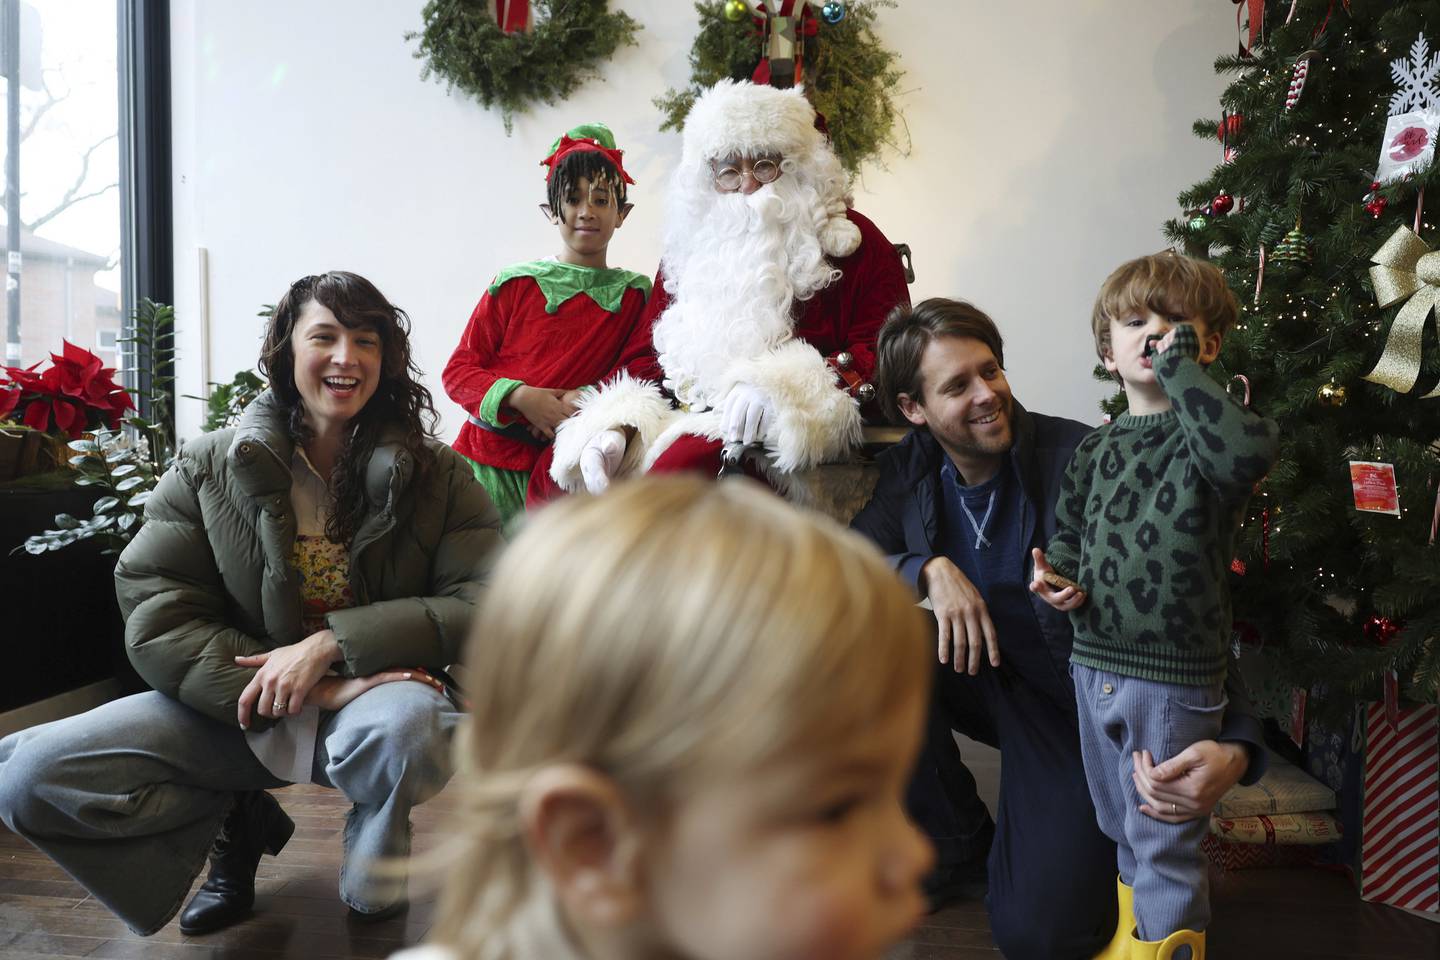 Santa Claus, played by Ronnie Trejo, waits for Sam Flores, 1, to pass before taking pictures with Katie Garvey, left, Santa's elf, played by Kamari Escobedo, 11, Ryan Ingebritson, and Ryan and Katie's son Artie, 3, at YO:U hair salon on Dec. 10, 2022, in Chicago. 